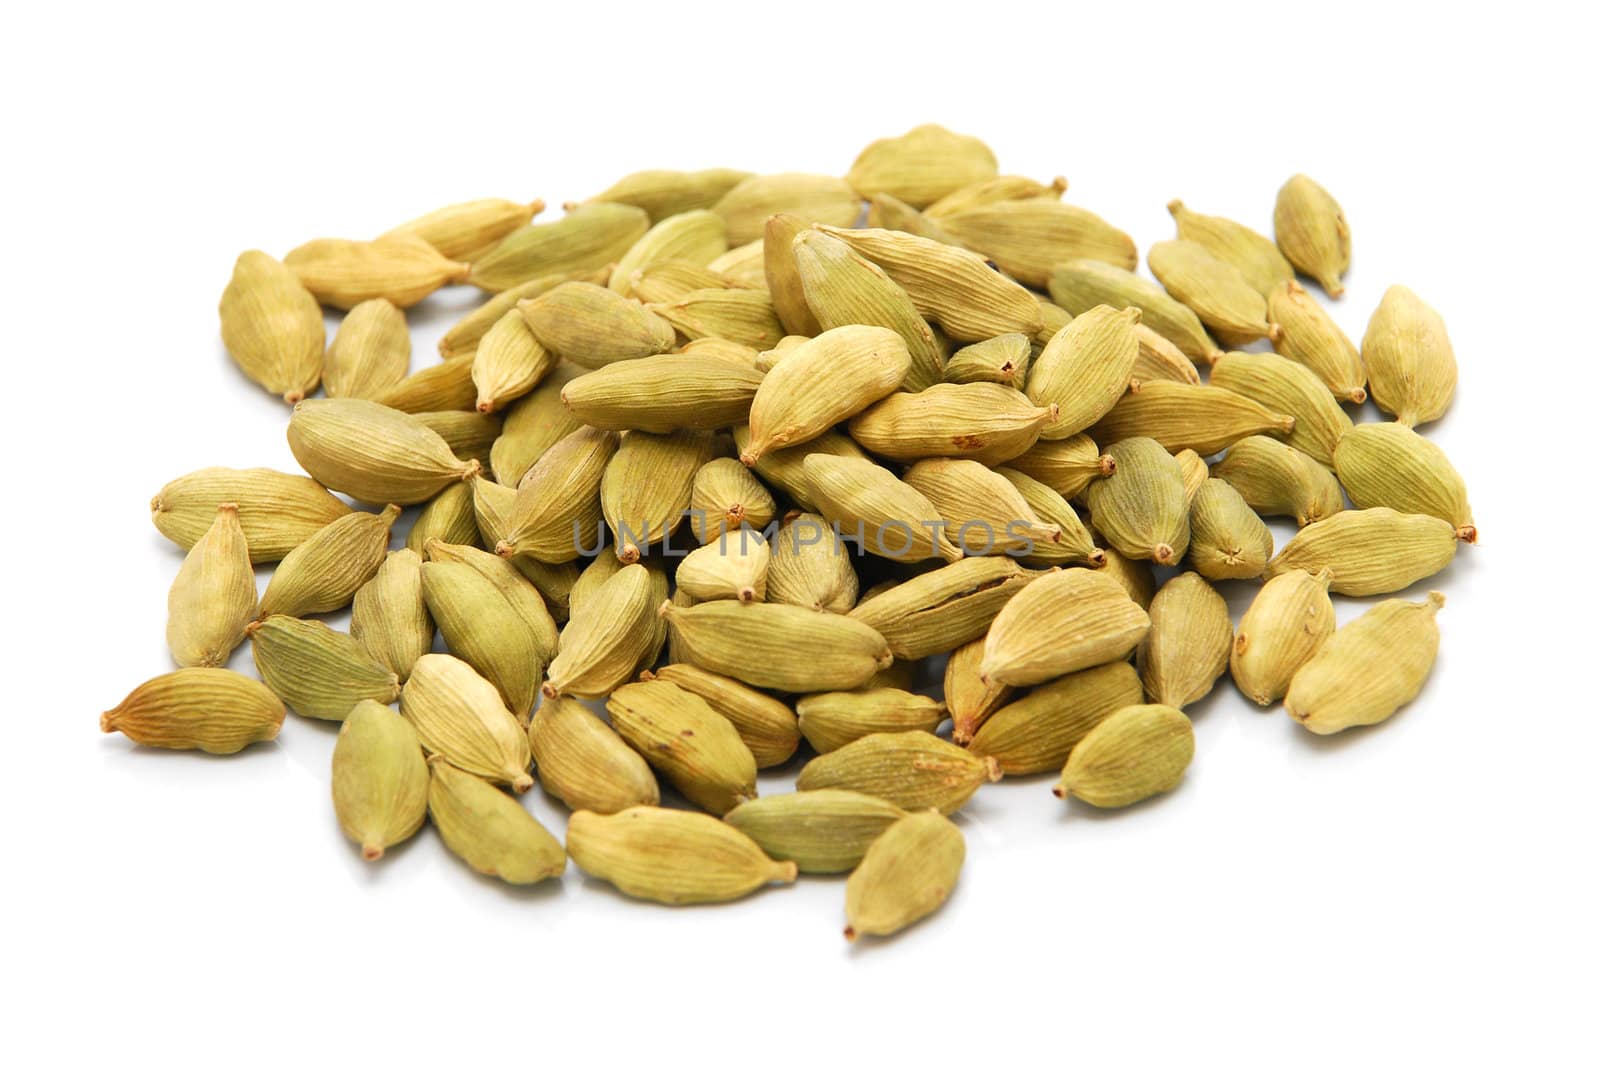 Whole cardamom pods, isolated on a white background